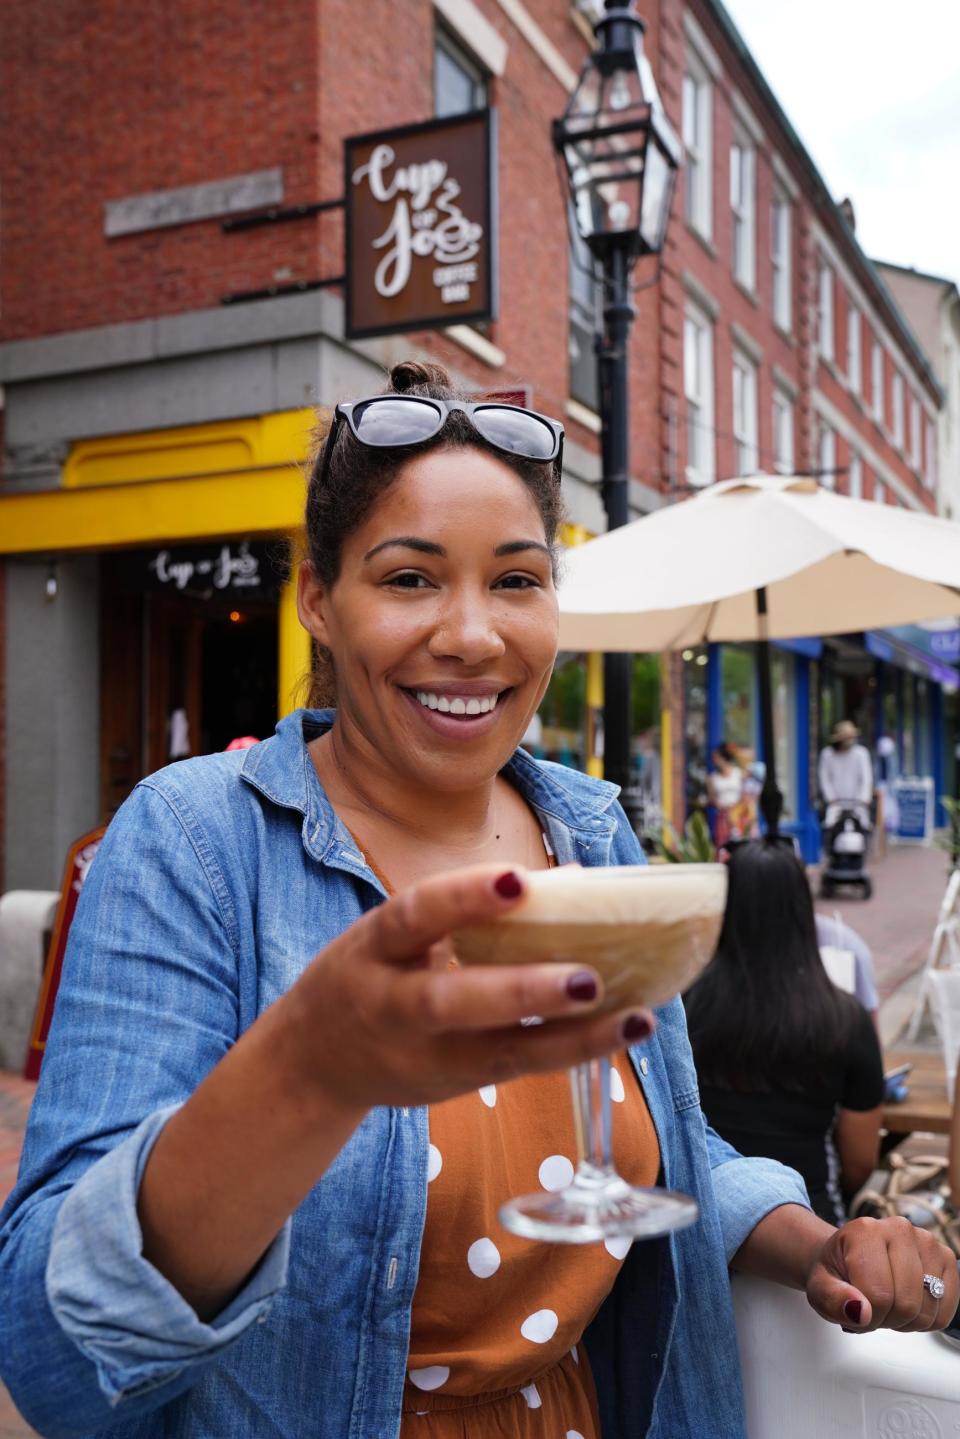 The owner of a coffee bar that sells alcohol in Portsmouth, New Hampshire, holds an adult beverage outdoors. Here in North Carolina, Fayetteville may soon allow people to drink alcoholic beverages on public streets and sidewalks in its downtown area.